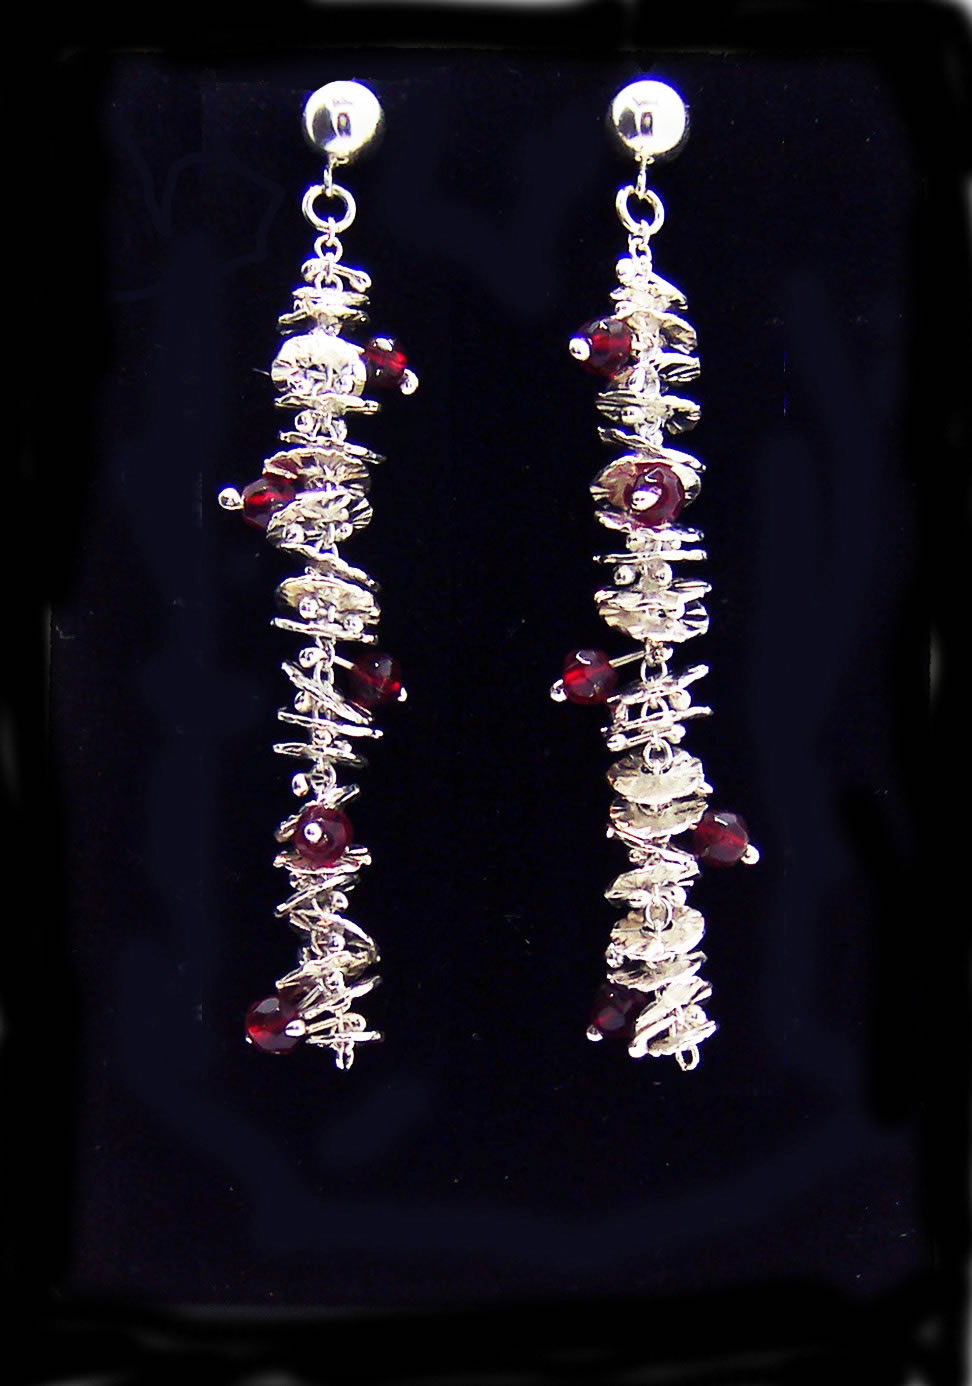 Silver Catkin Earrings with Red Beads